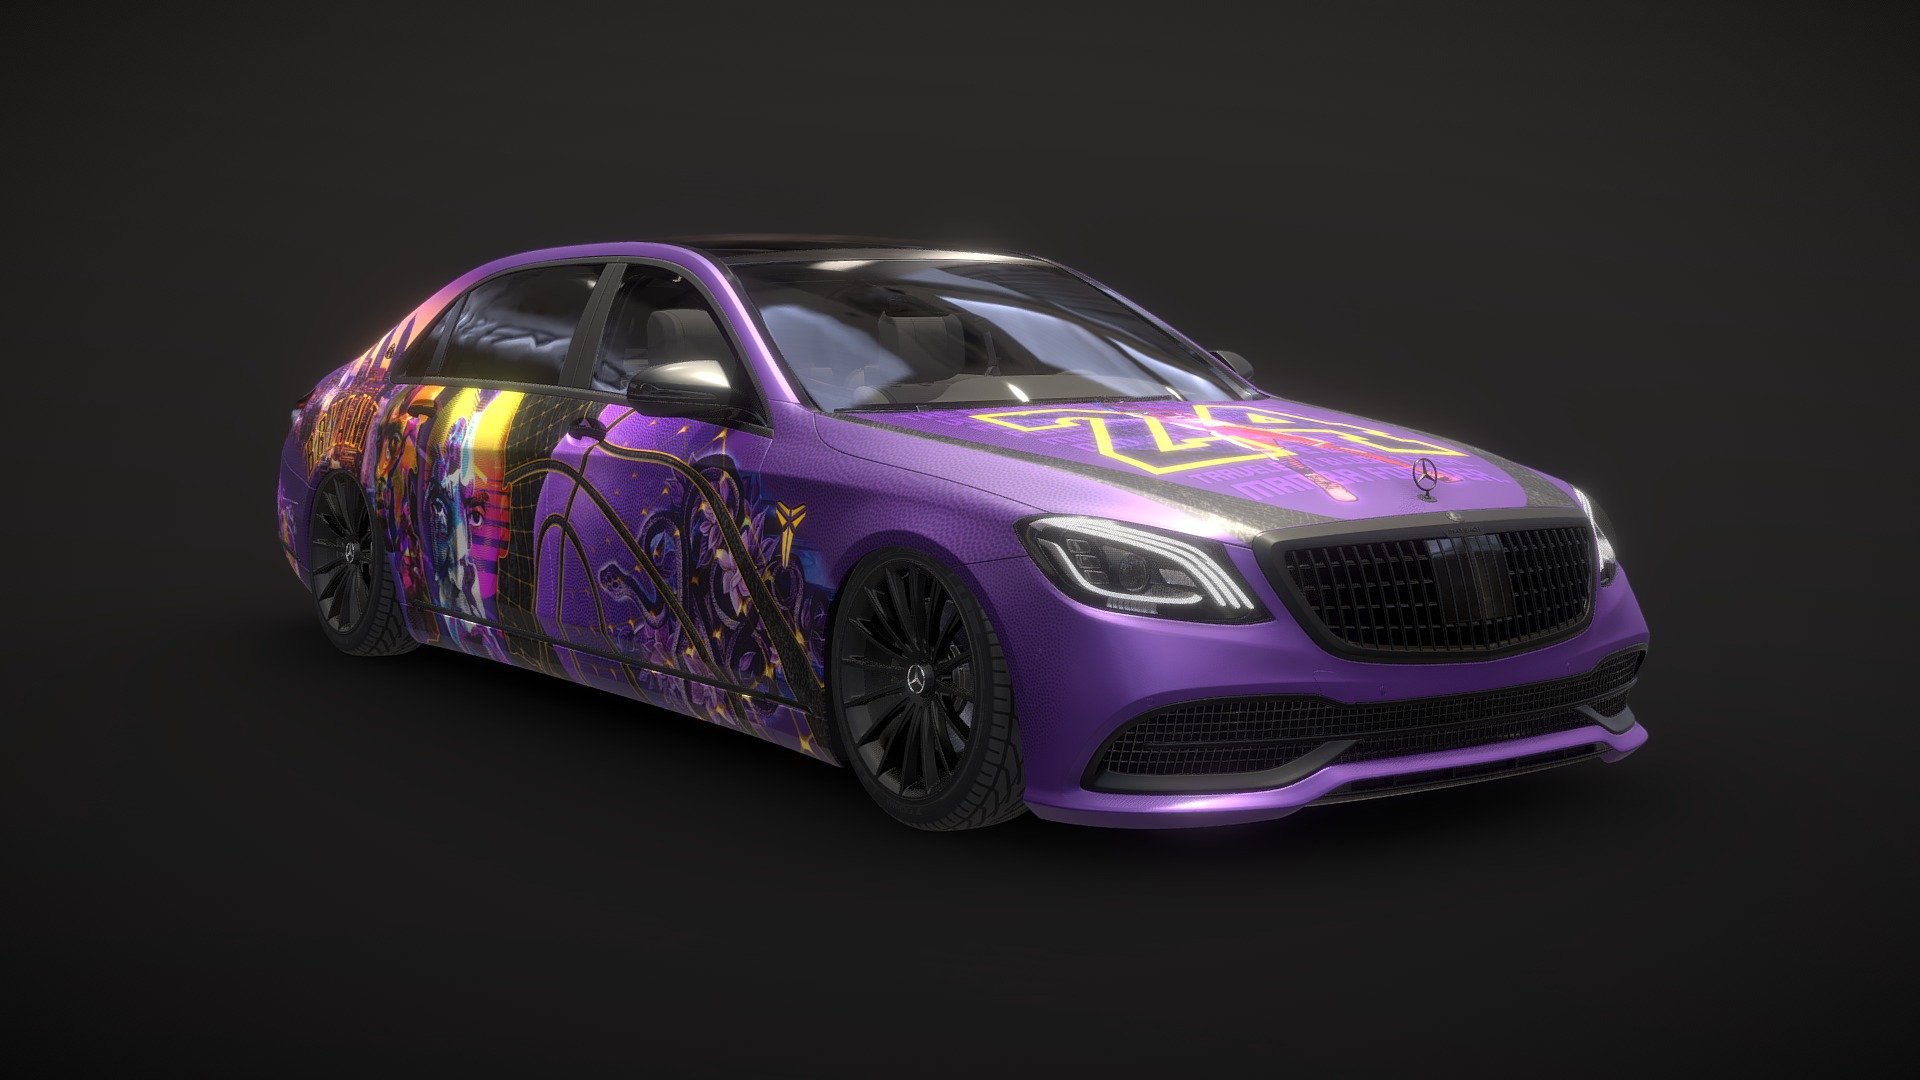 Collab with Corsa Auto Design

https://www.youtube.com/watch?v=EYEaru1exQw - Kobe Bryant Tribute - Mercedes-Maybach S650 - 3D model by Hammad (@xix) 3d model